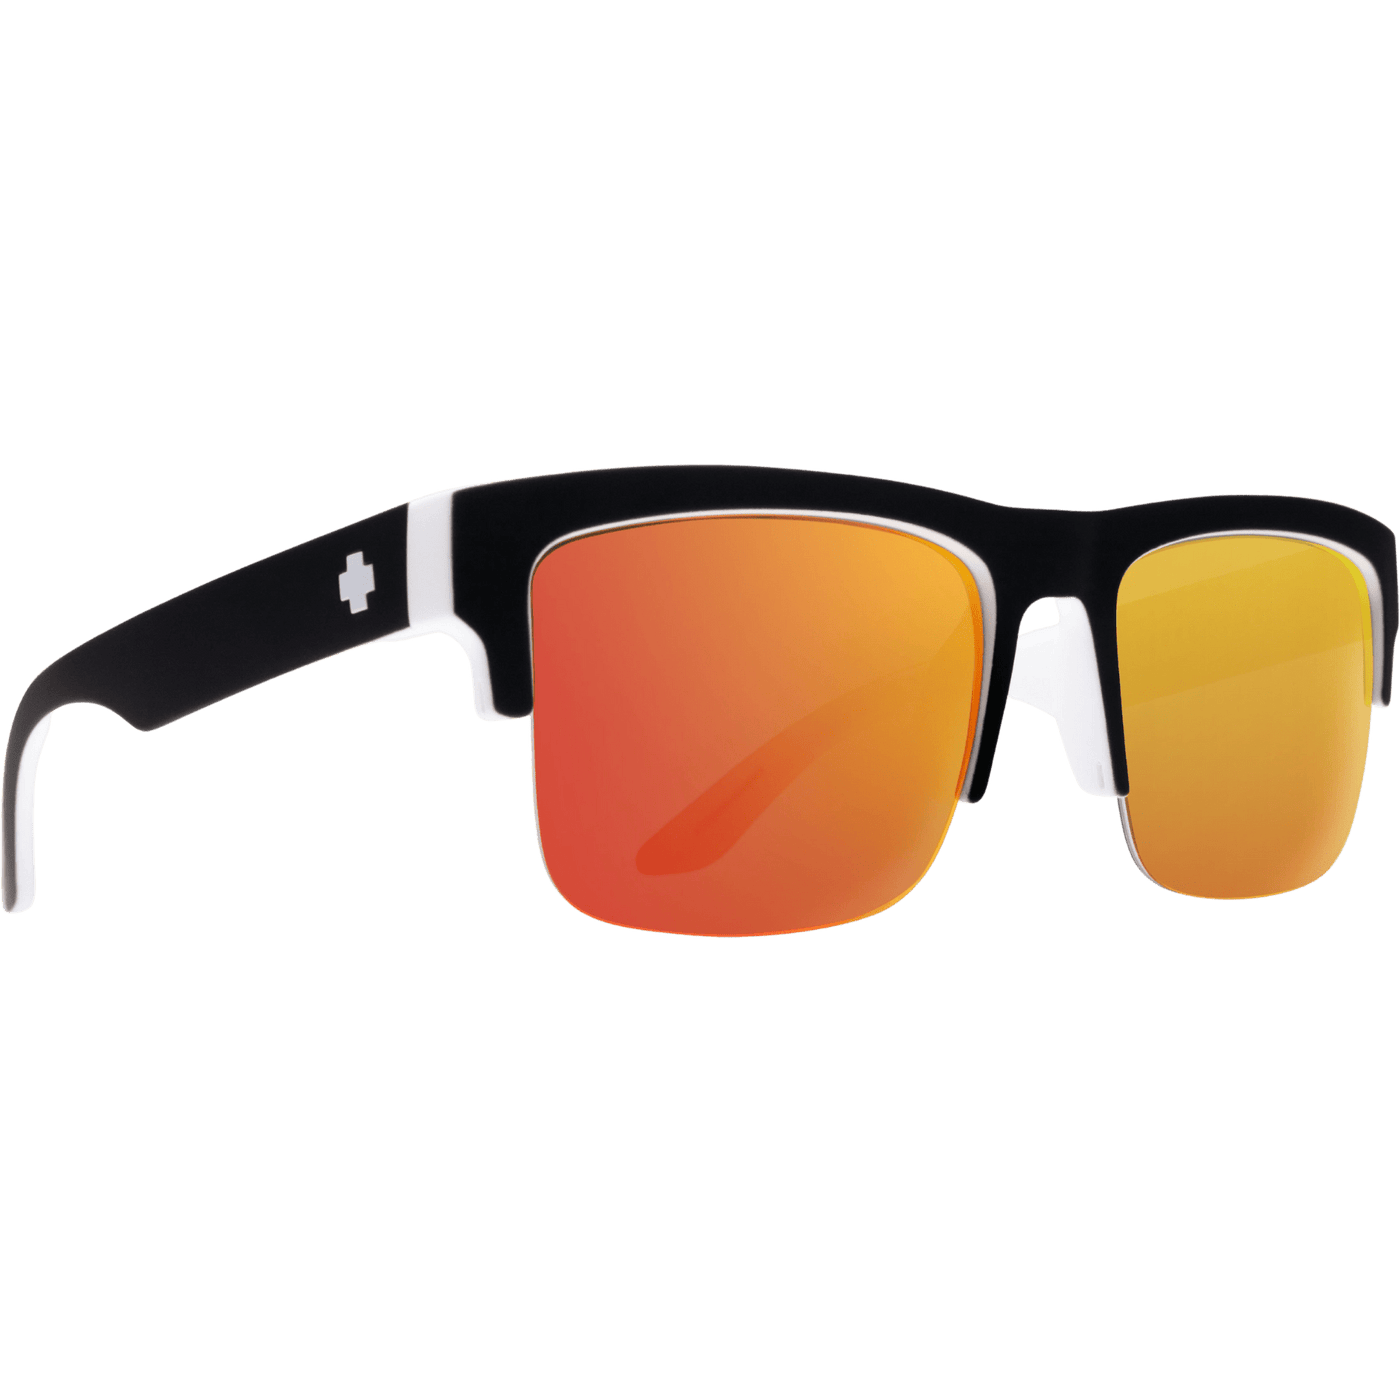 SPY DISCORD 5050 Sunglasses, Happy Lens - Red 8Lines Shop - Fast Shipping